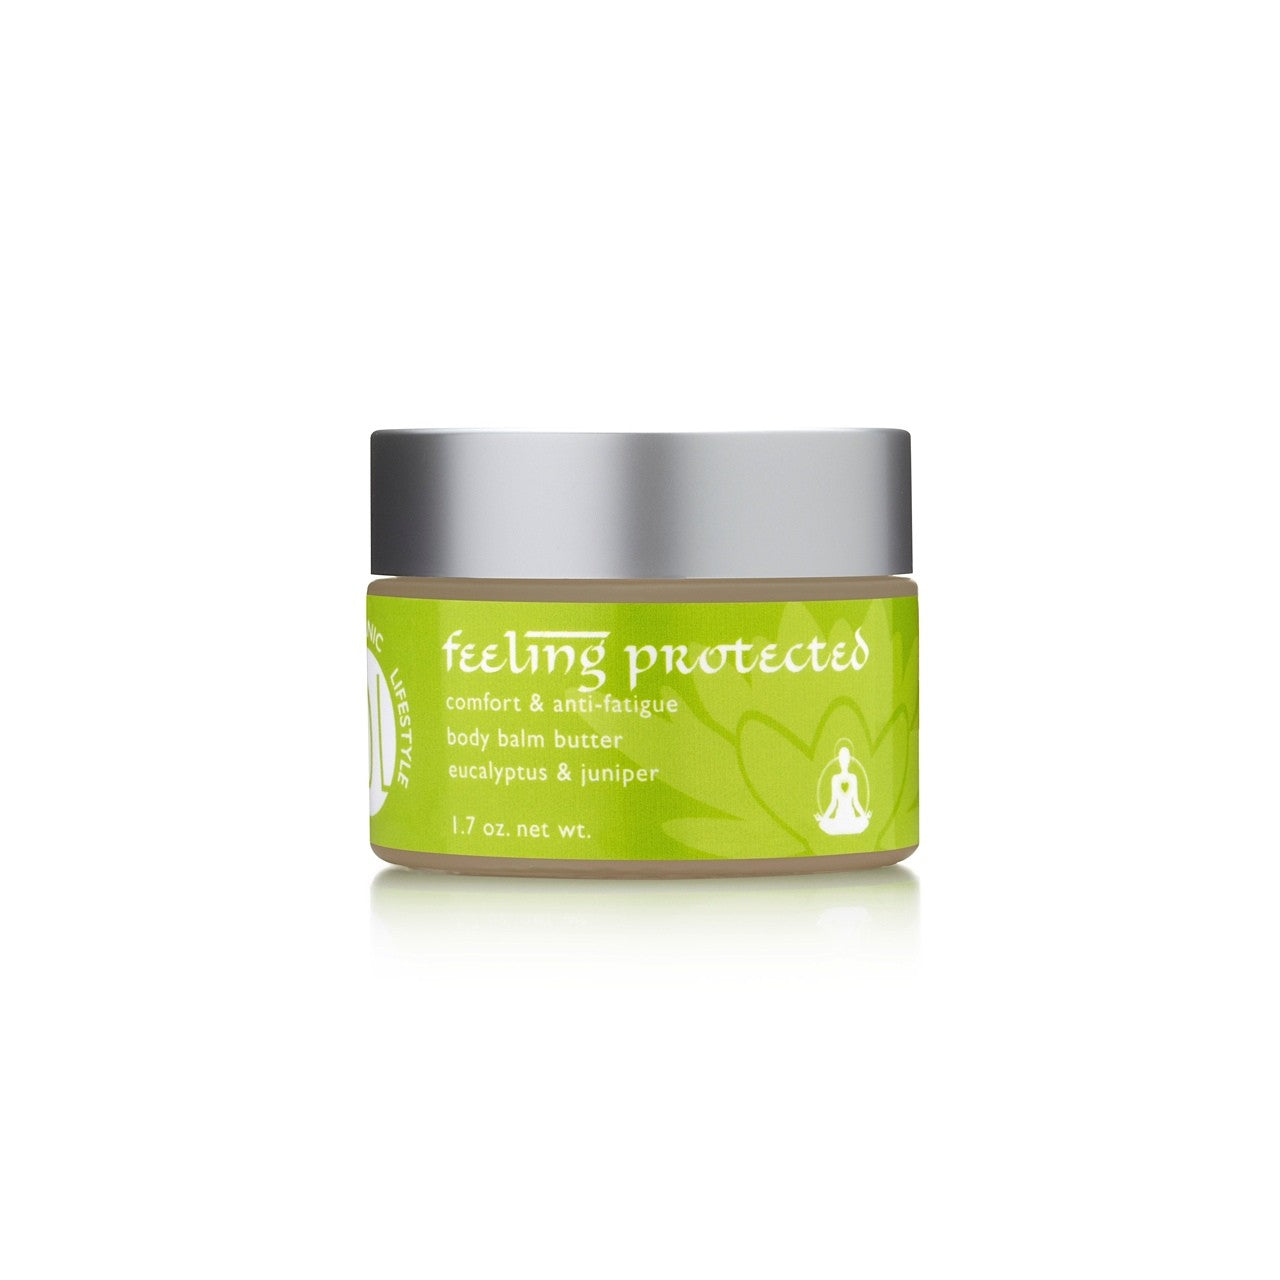 Ling Skincare feeLING Protected Butter 1.7oz